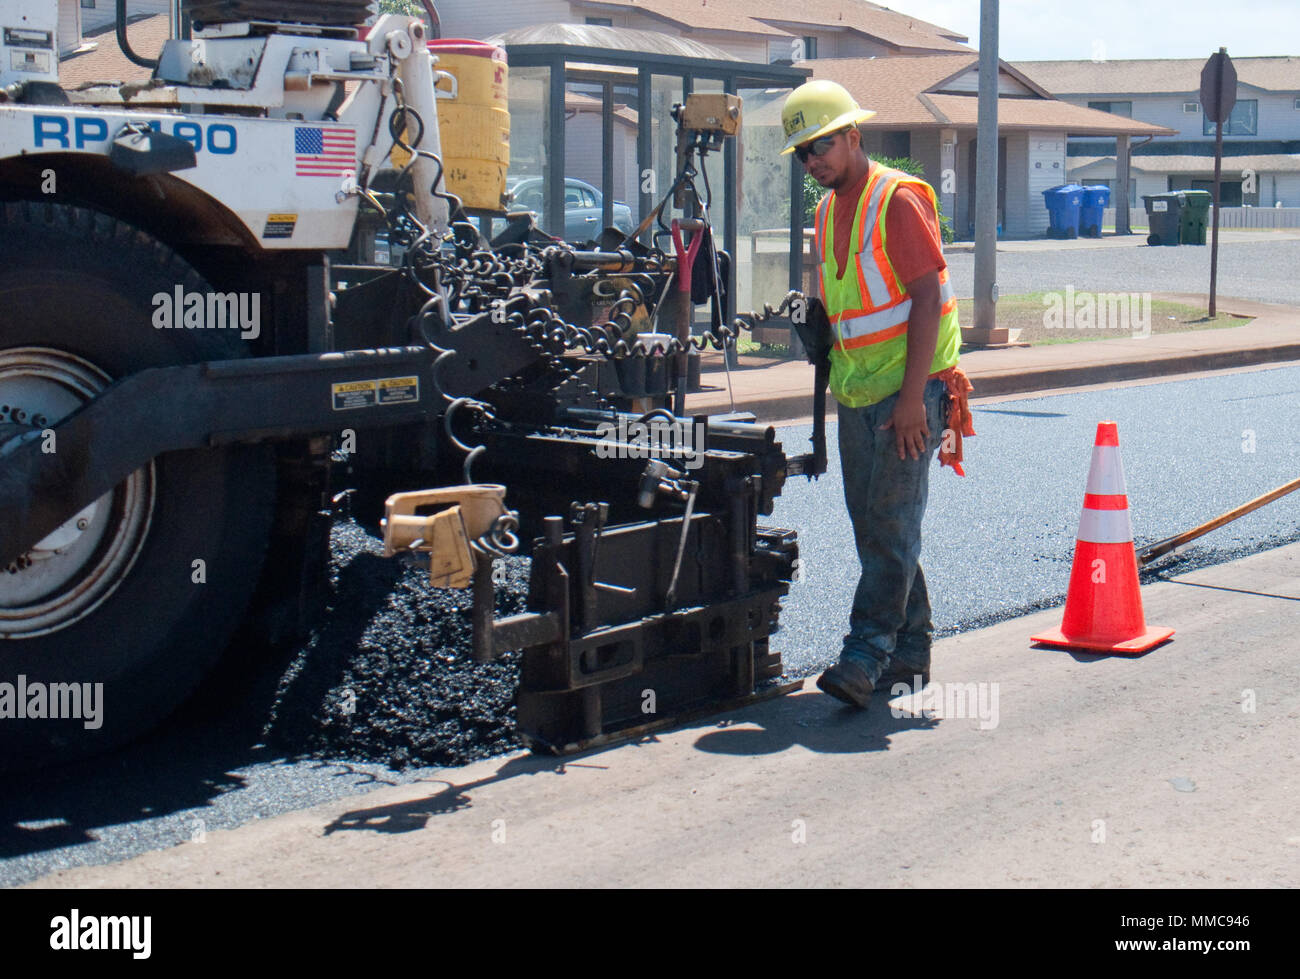 WHEELER ARMY AIRFIELD — Cody Castro, a laborer with Grace Pacific LLC, works on repaving Lauhala Road near the Wili Wili neighborhood at Wheeler Army Airfield, Sept. 27, 2017. (U.S. Army photo by Kristen Wong, Oahu Publications) Stock Photo